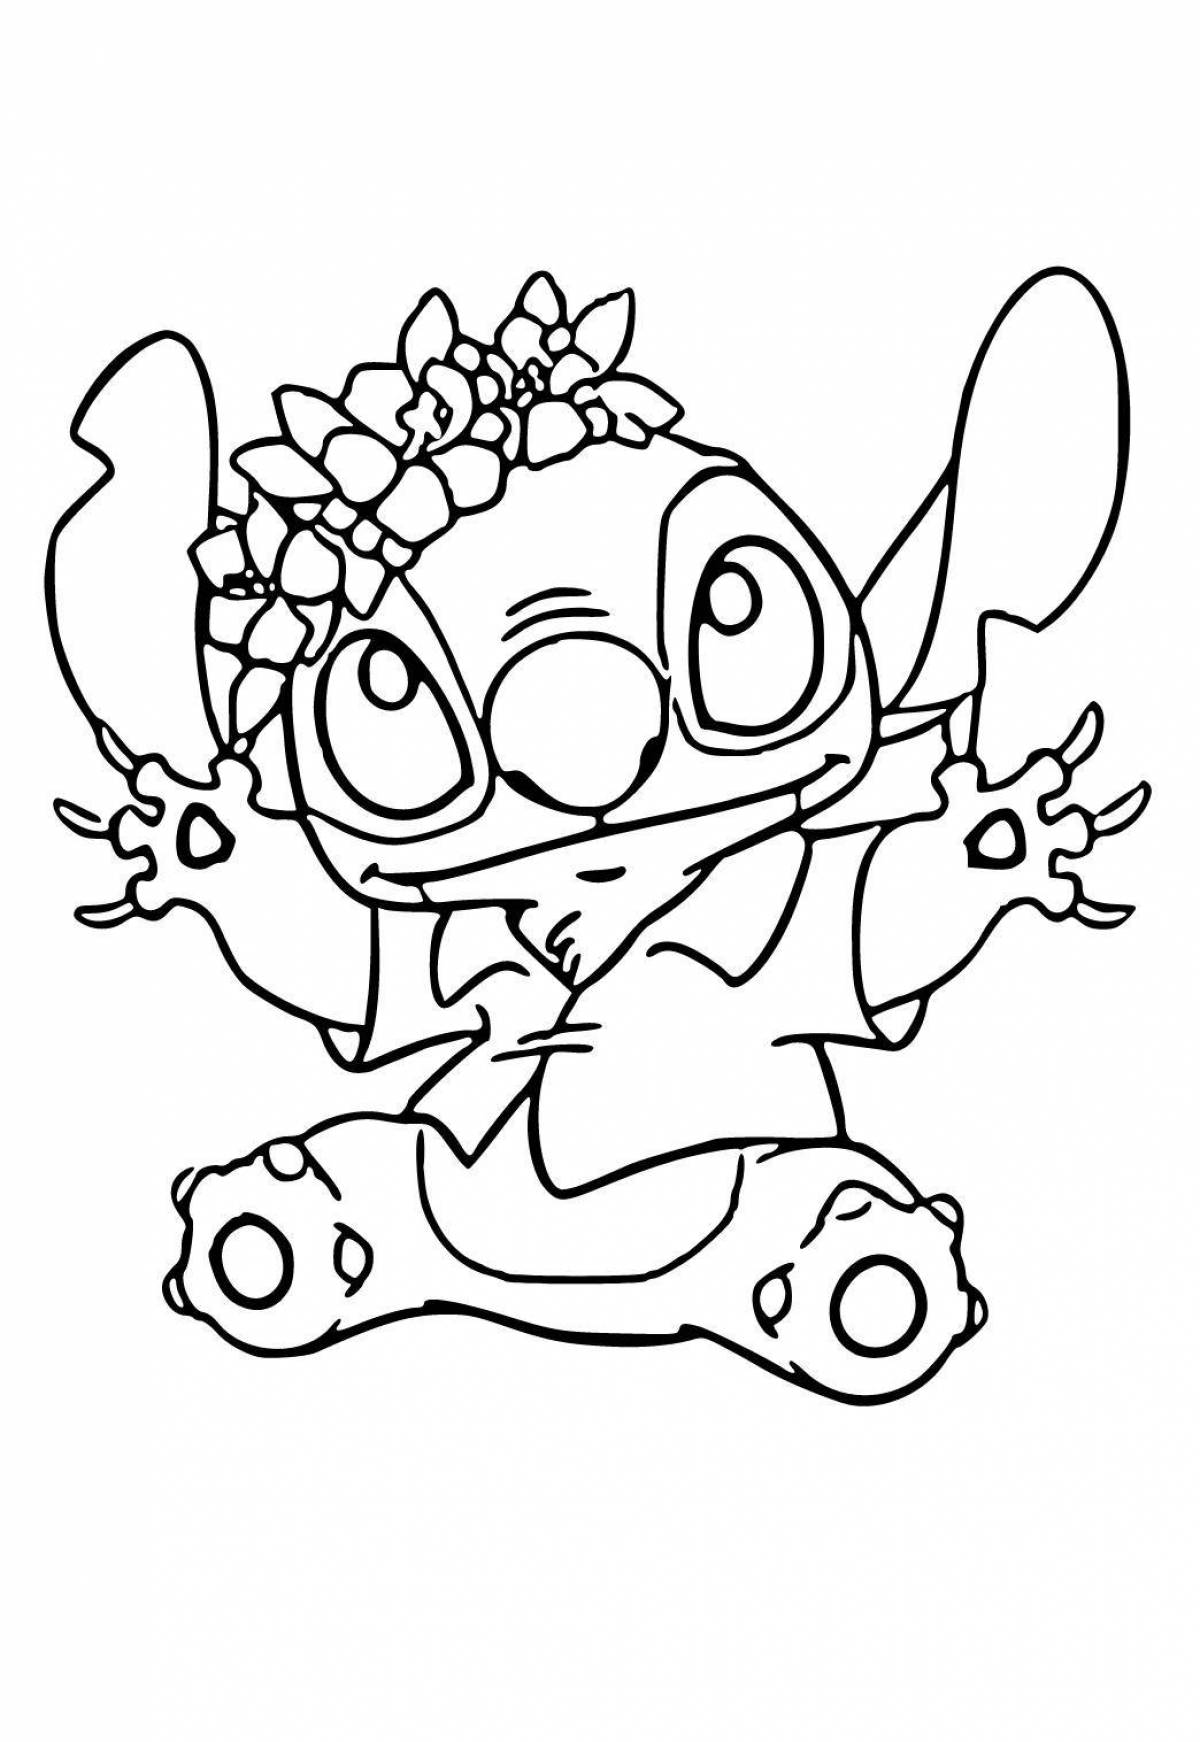 Charming stitch and pikachu coloring book